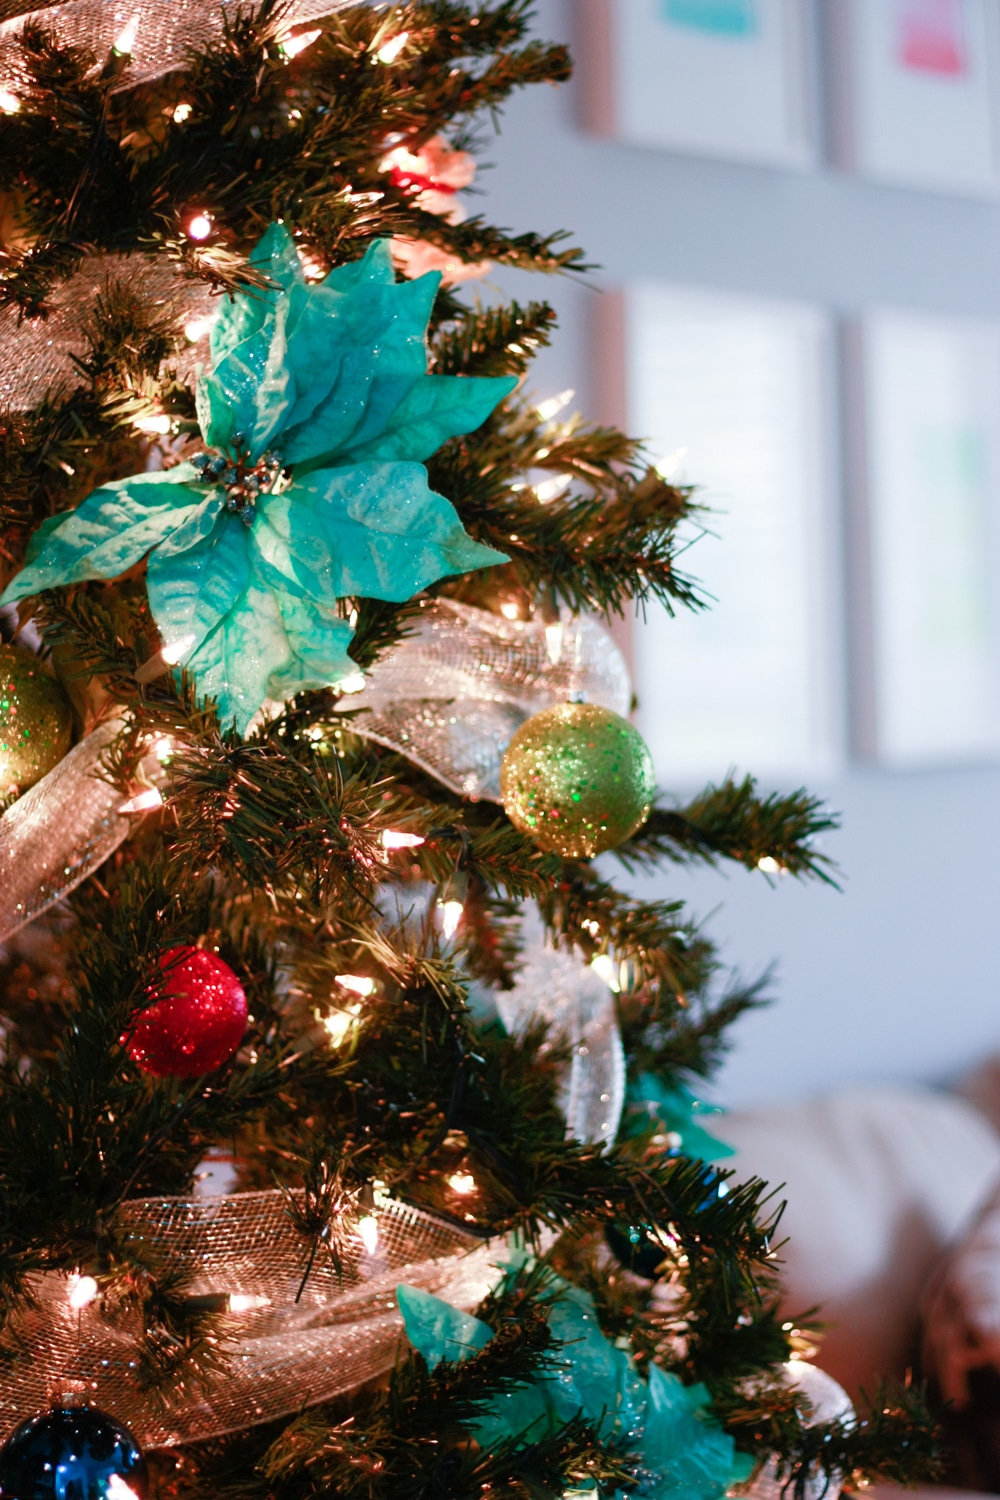 A colorful Christmas tree! Decorate with non-traditional Christmas colors.